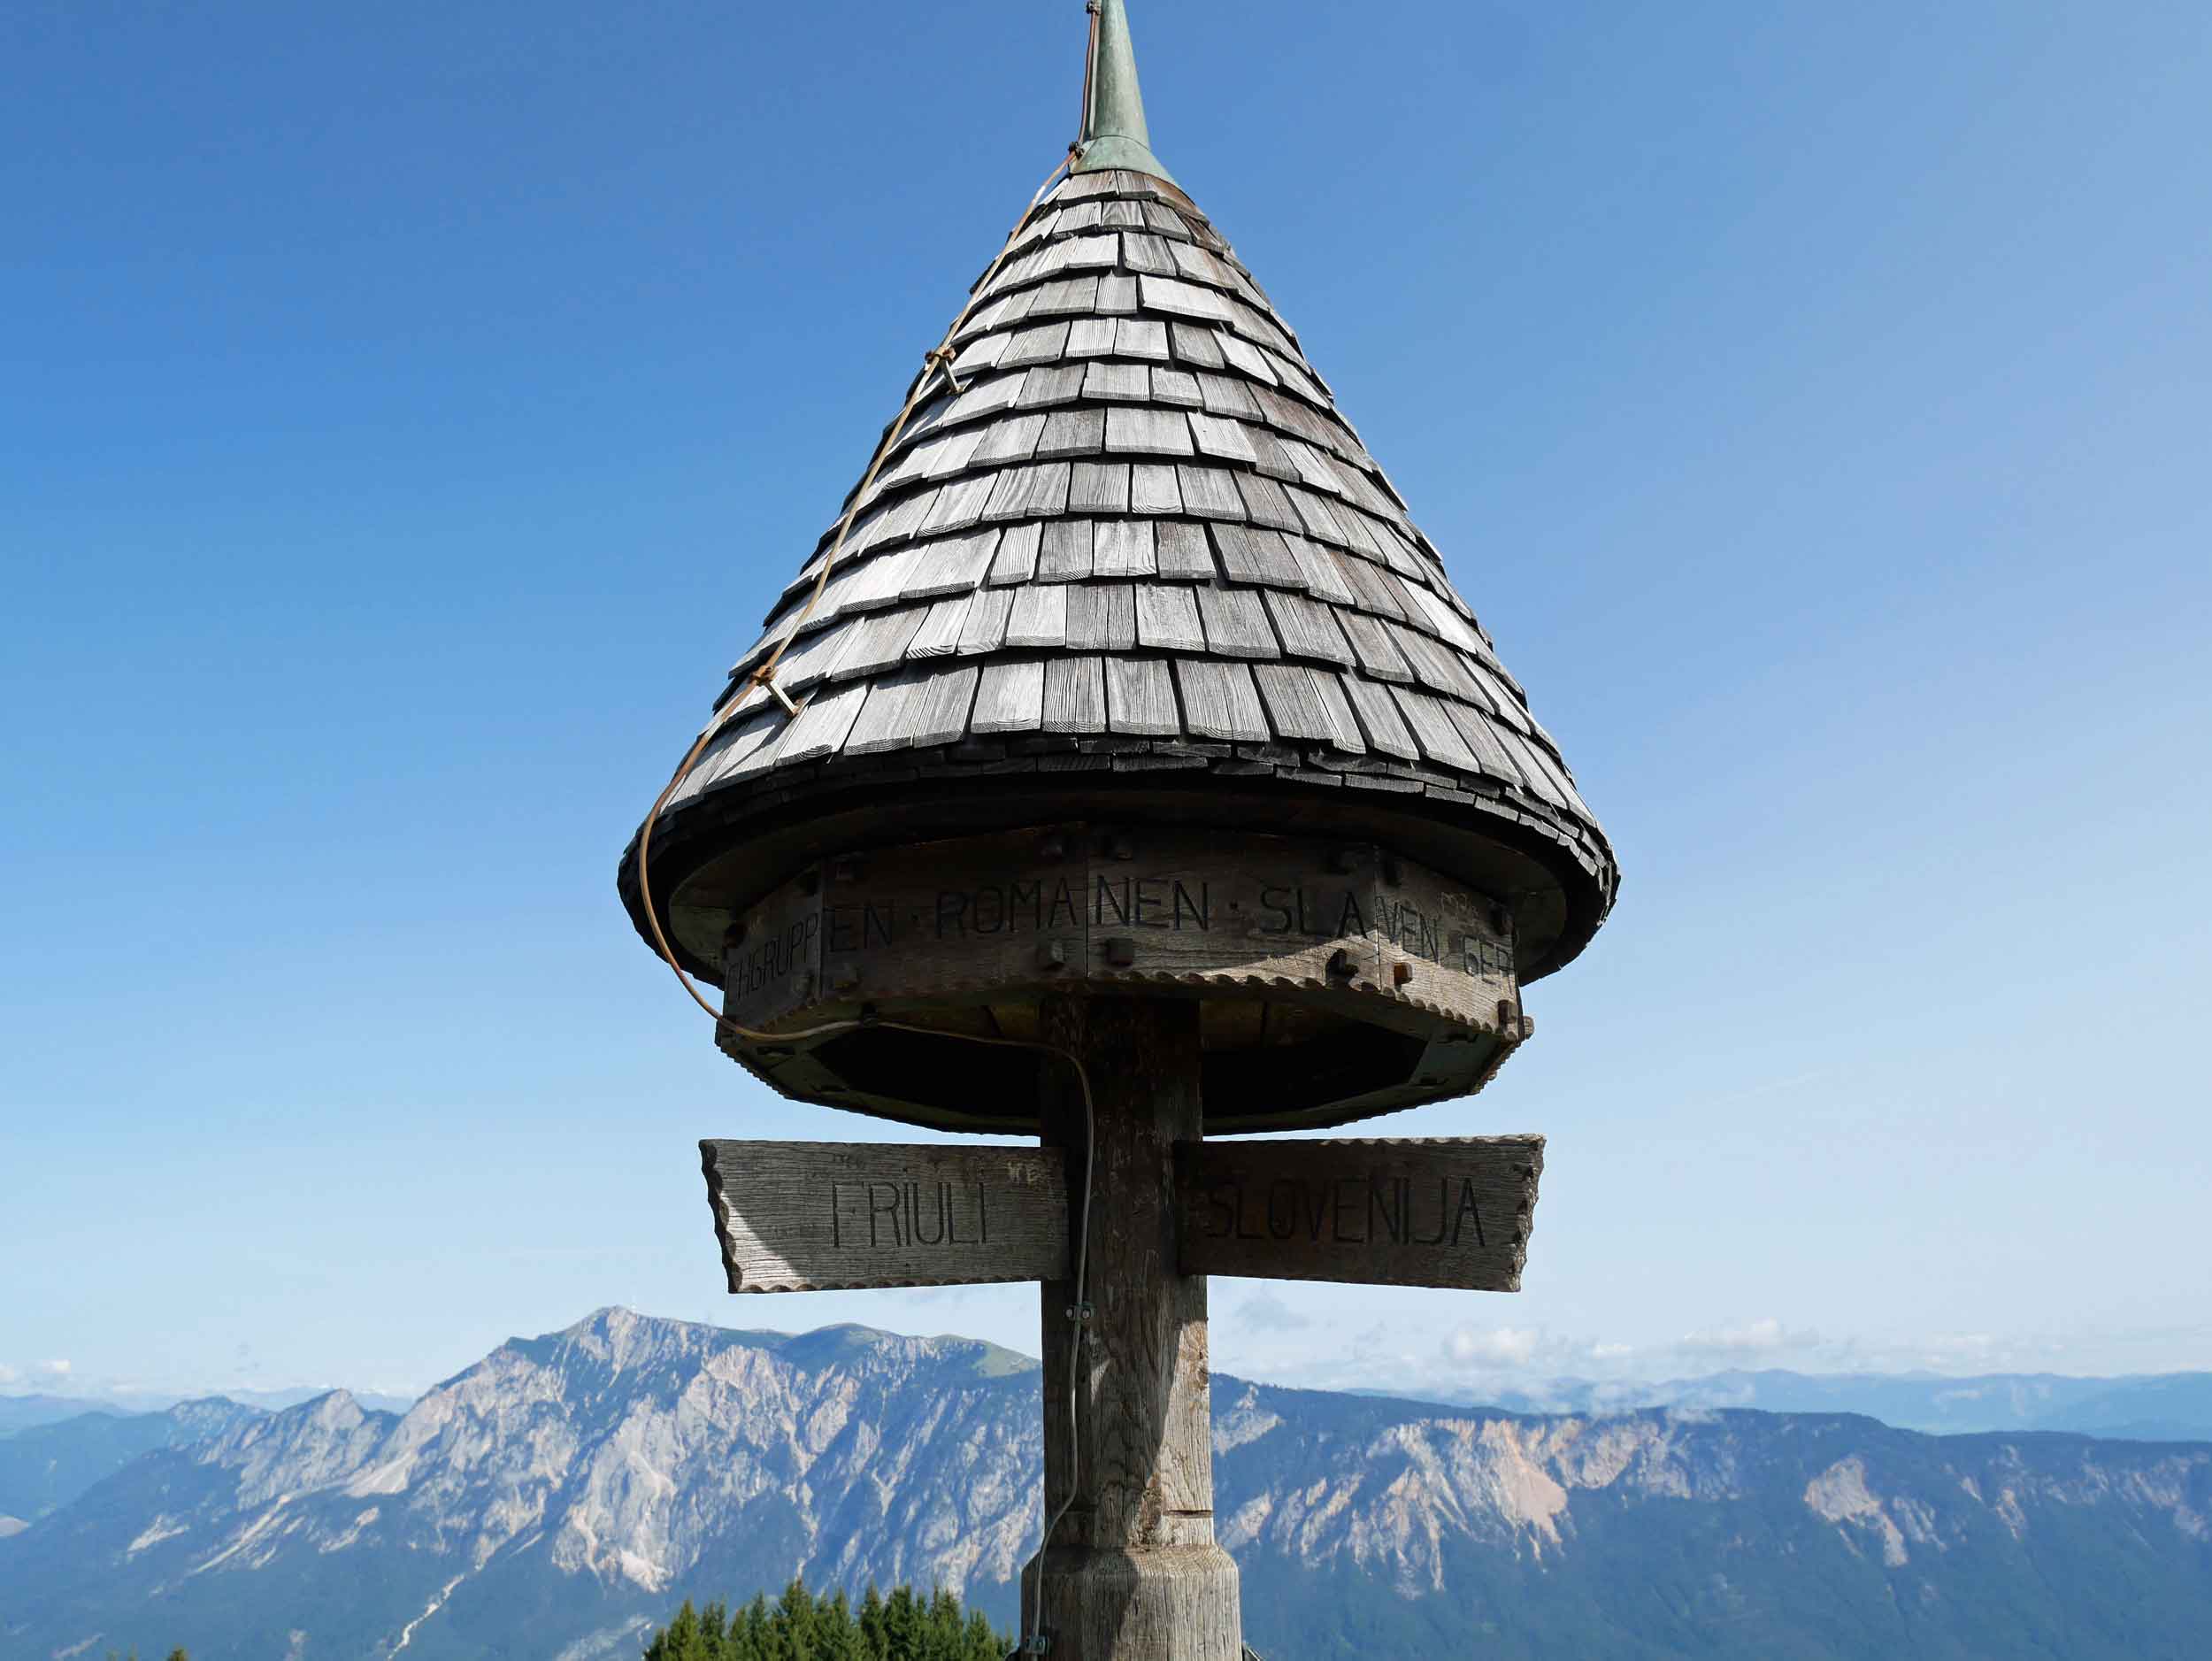  At the top of Tromeja was a marker defining the borders between Slovenia, Italy and Austria.&nbsp; 